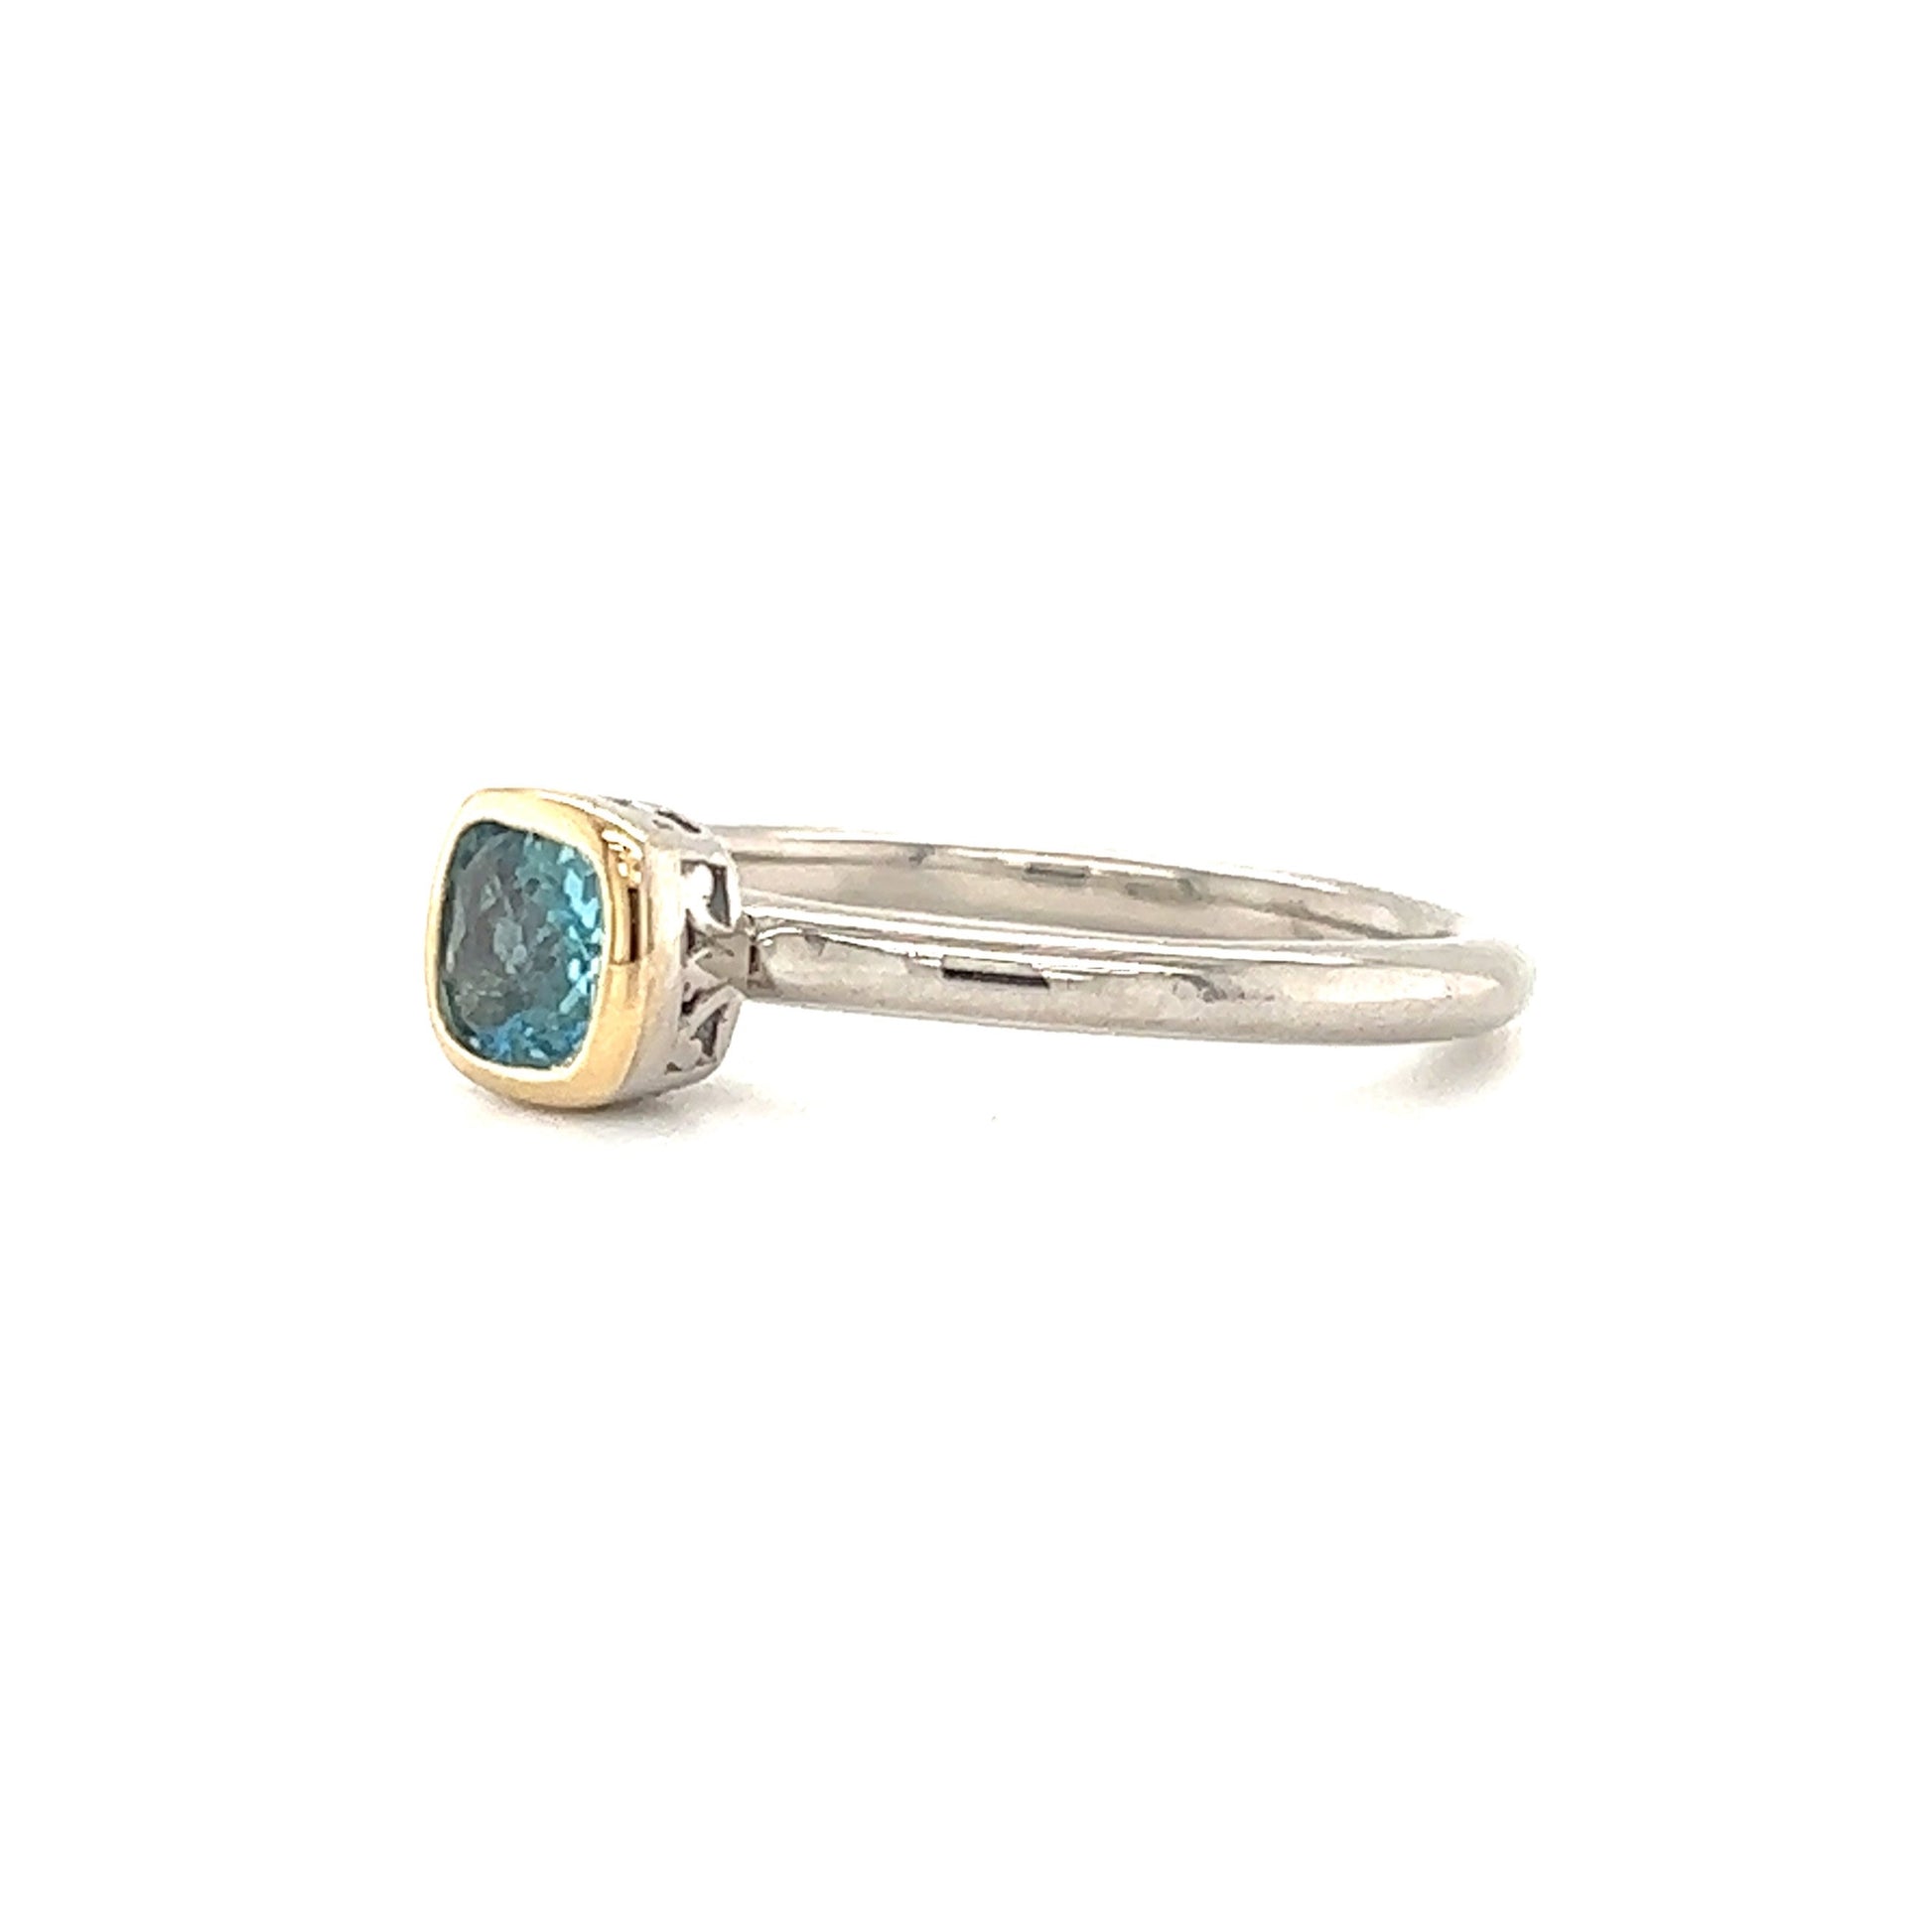 Cushion Blue Topaz Ring in Sterling Silver with 14K Yellow Gold Accent Left Side View